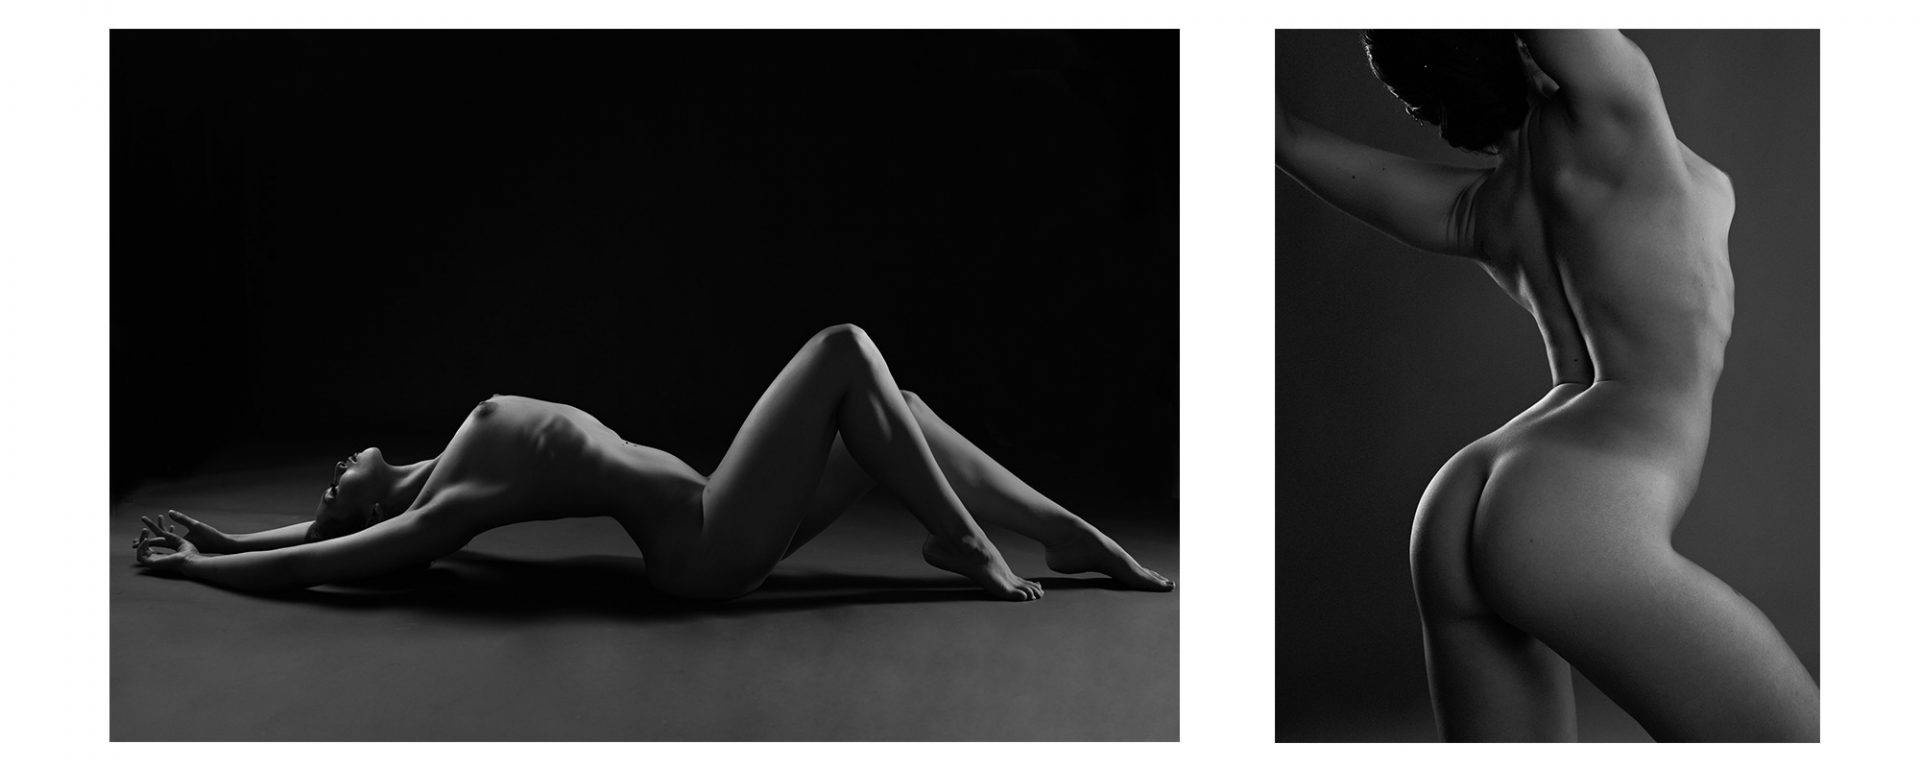 Black and white female artistic nude photos